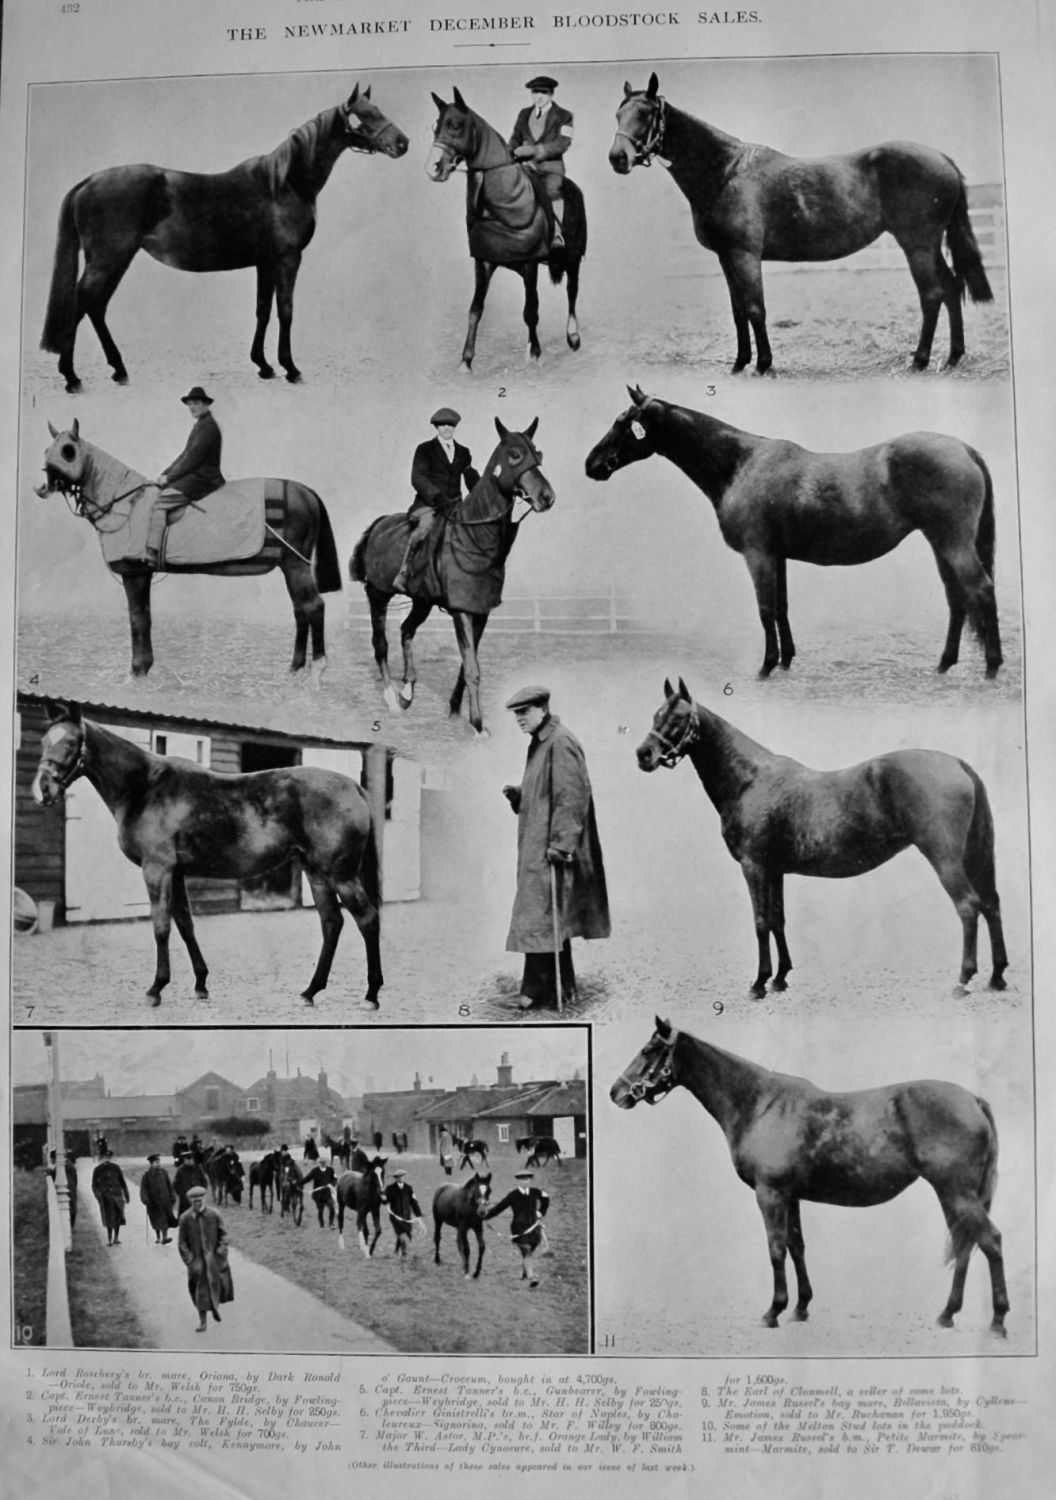 The Newmarket December Bloodstock Sales. 1915. (Page 1).